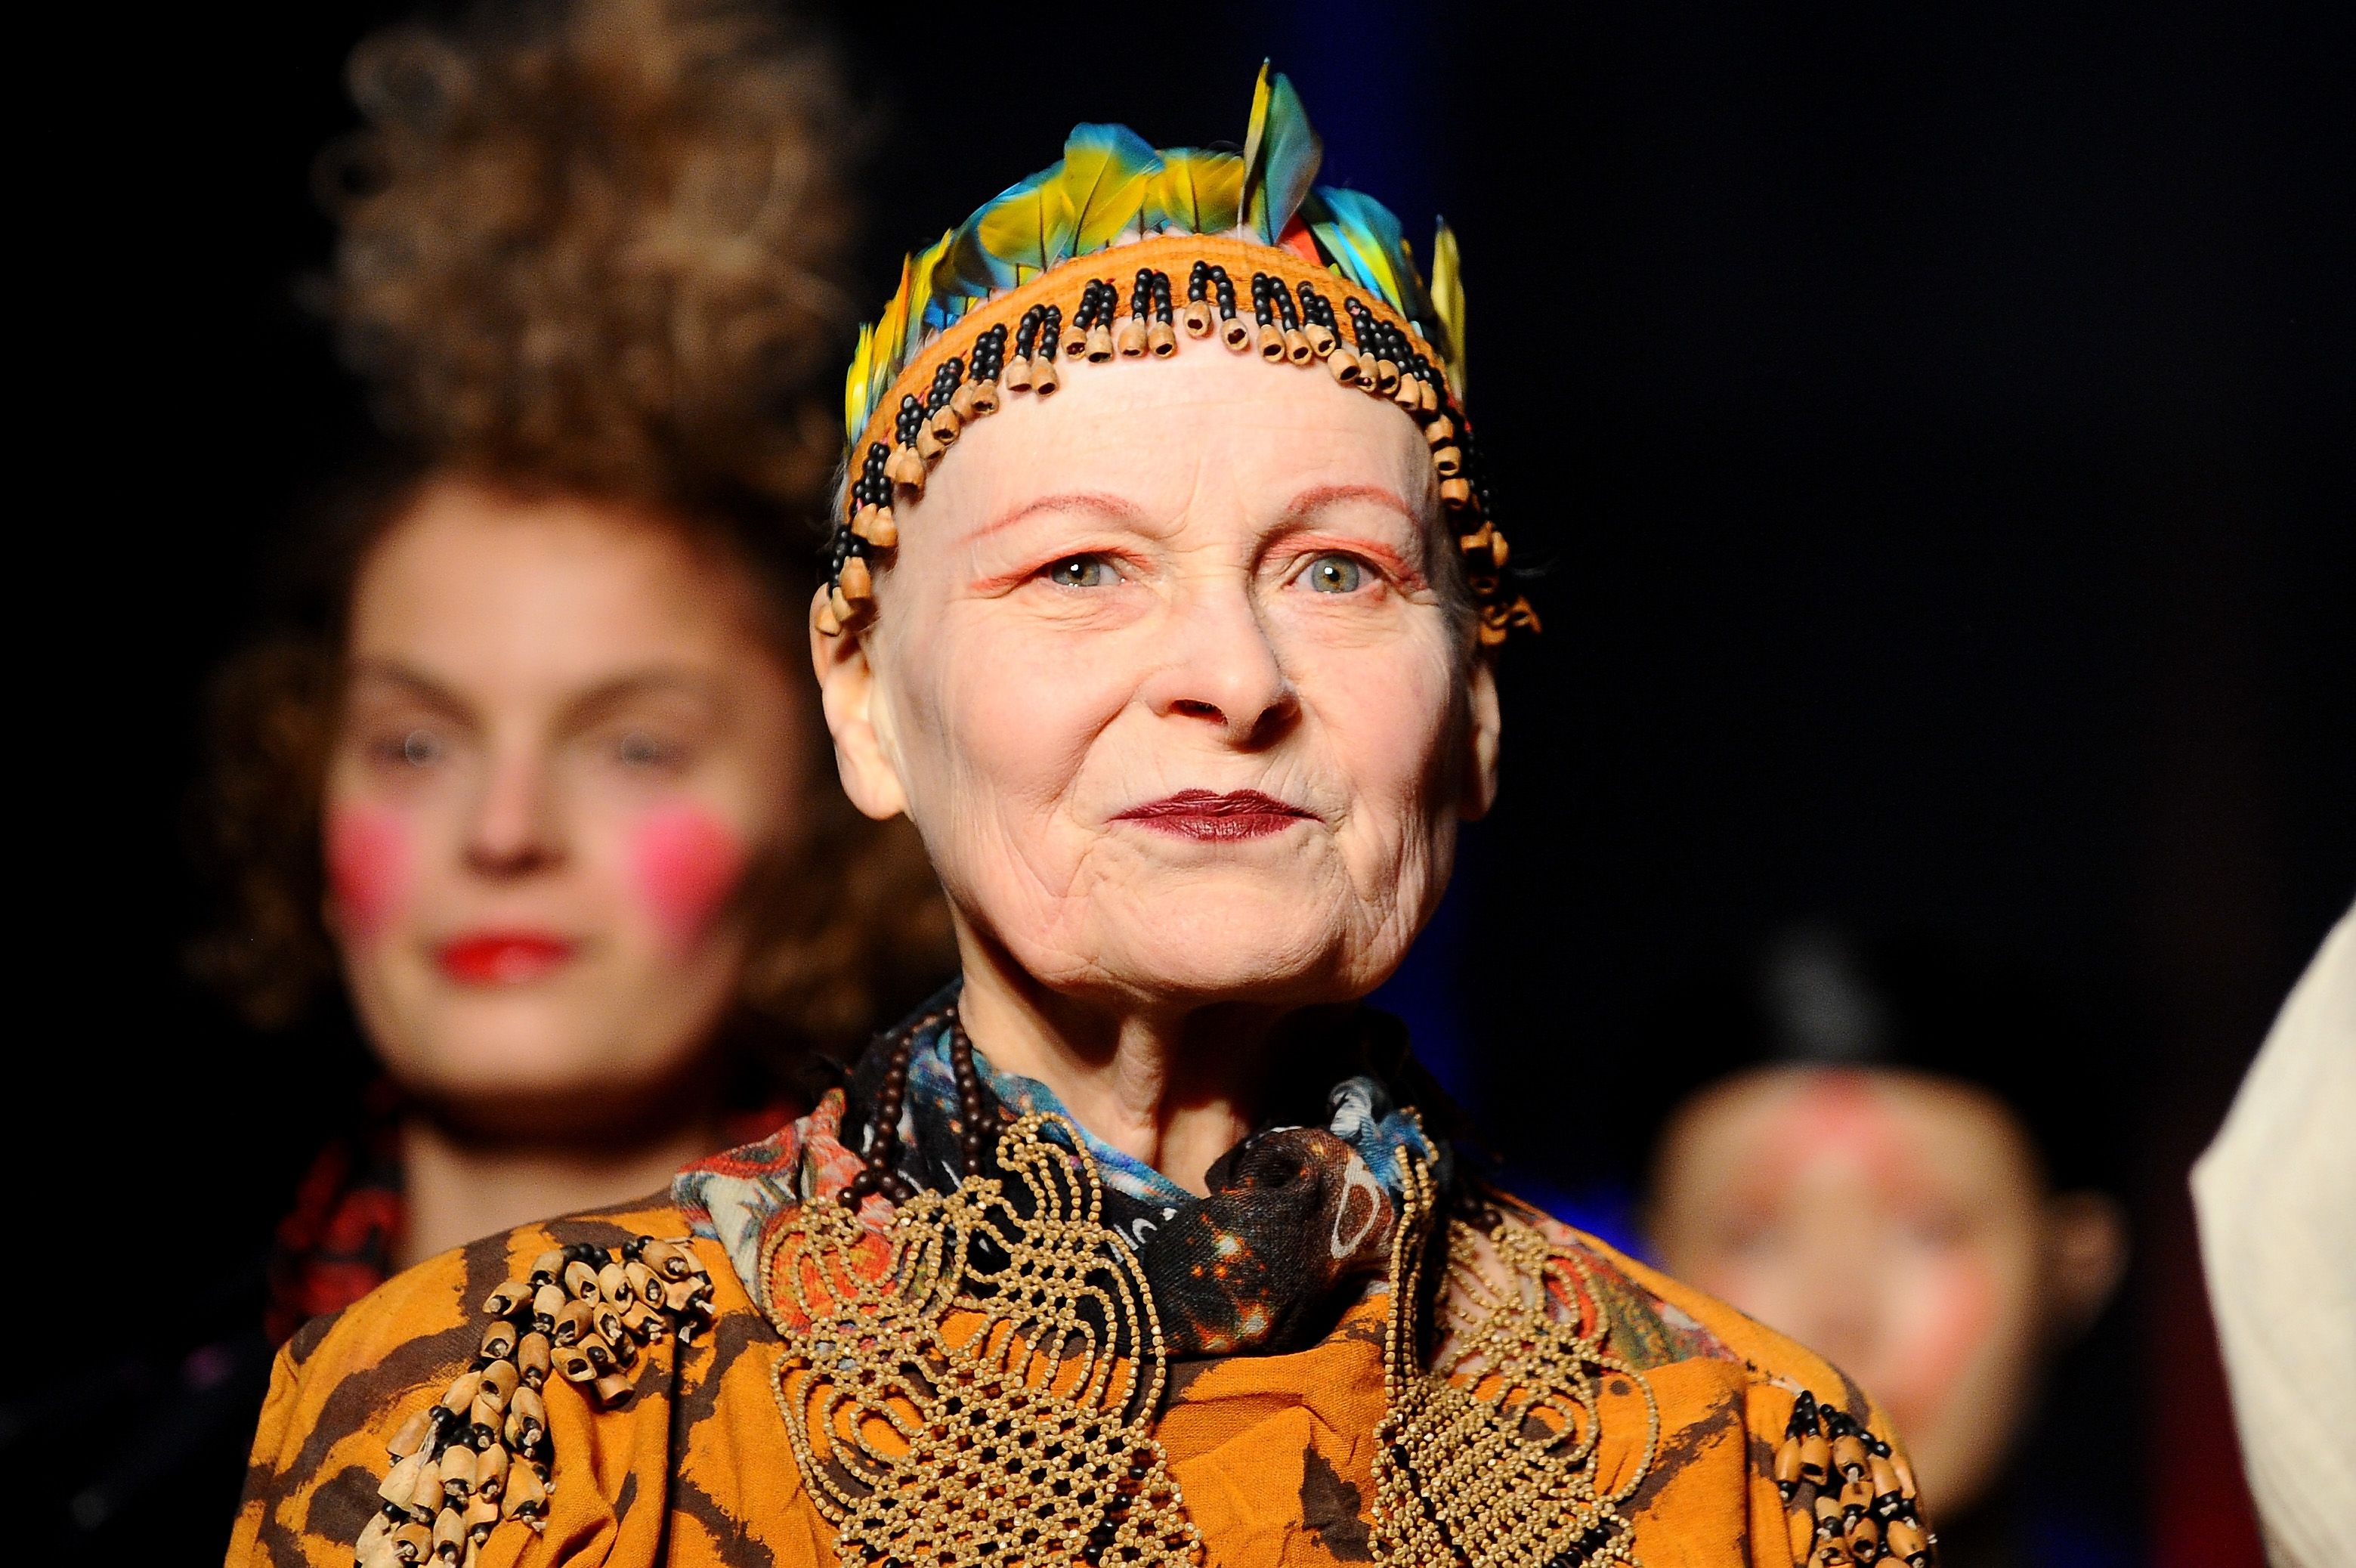 Vivienne Westwood, the 'grandmother of punk fashion